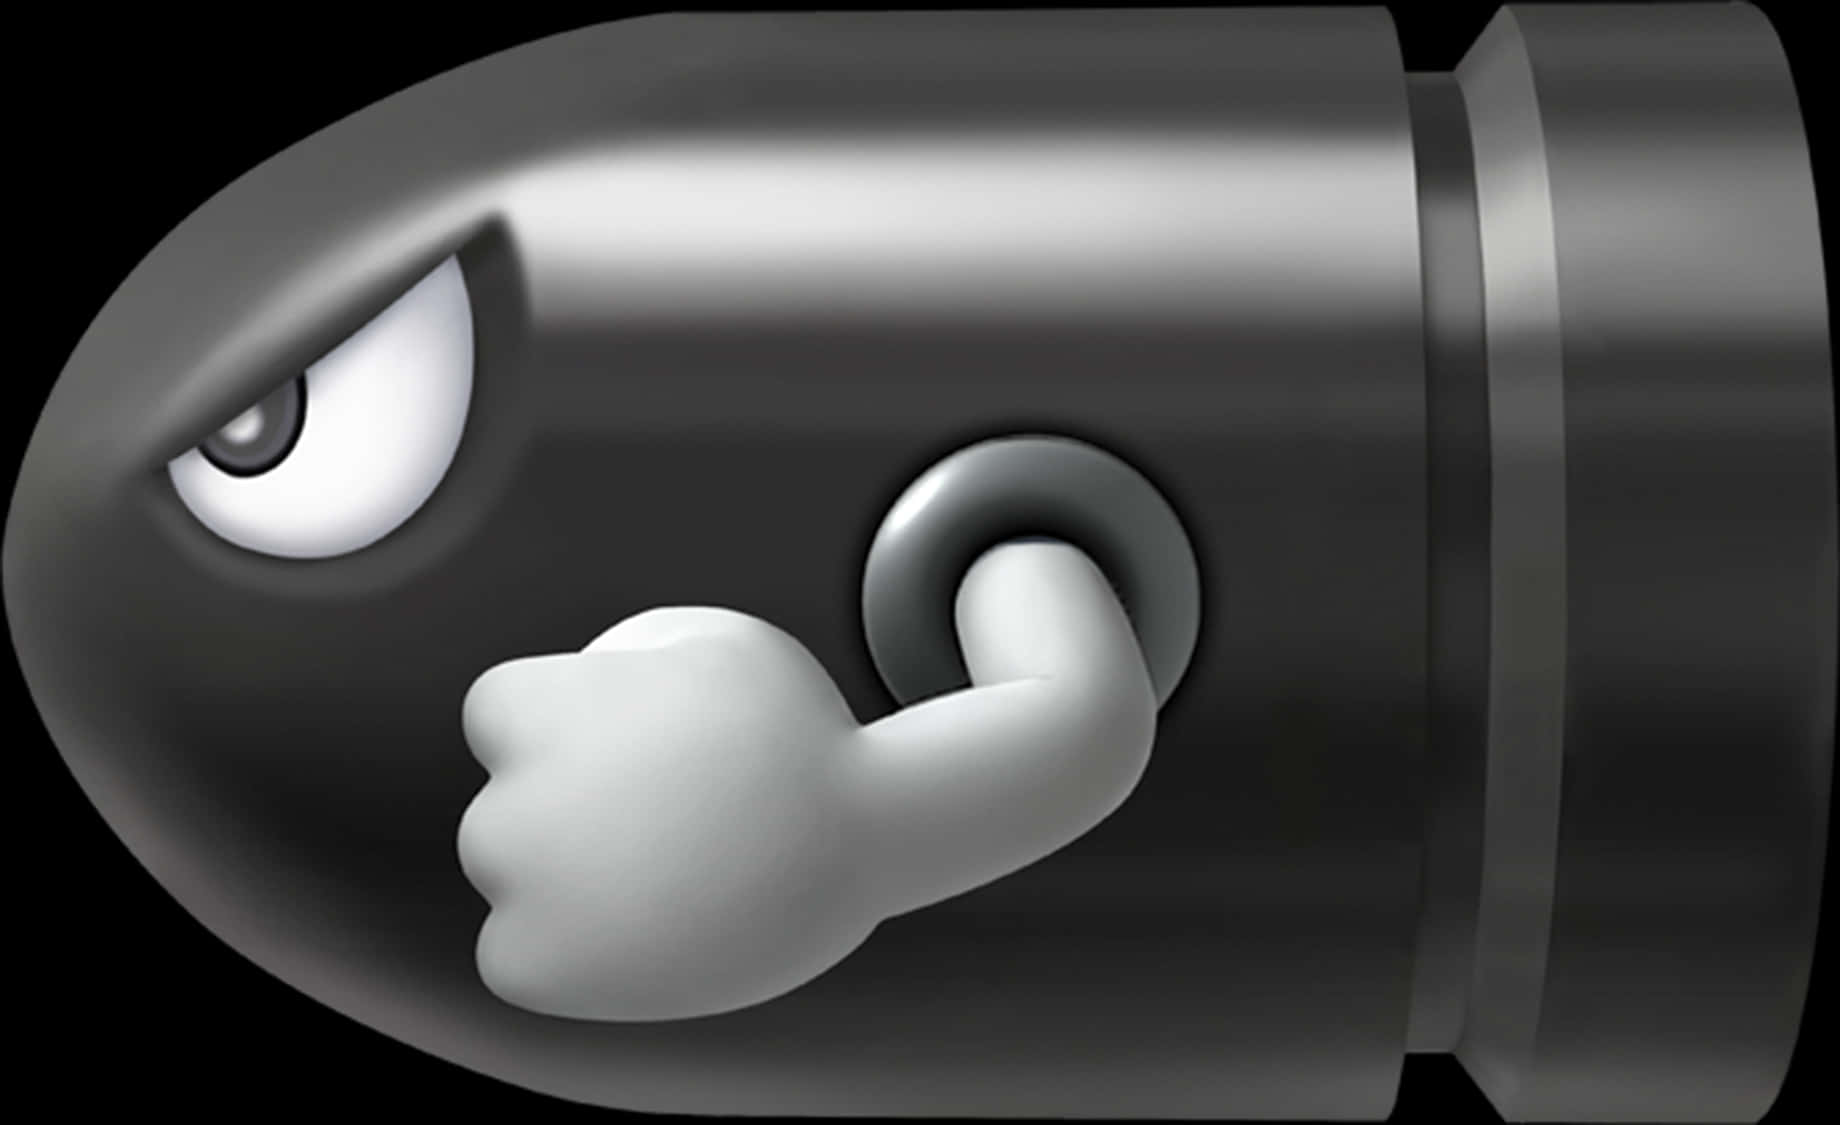 A Cartoon Character With A Hand On A Round Object